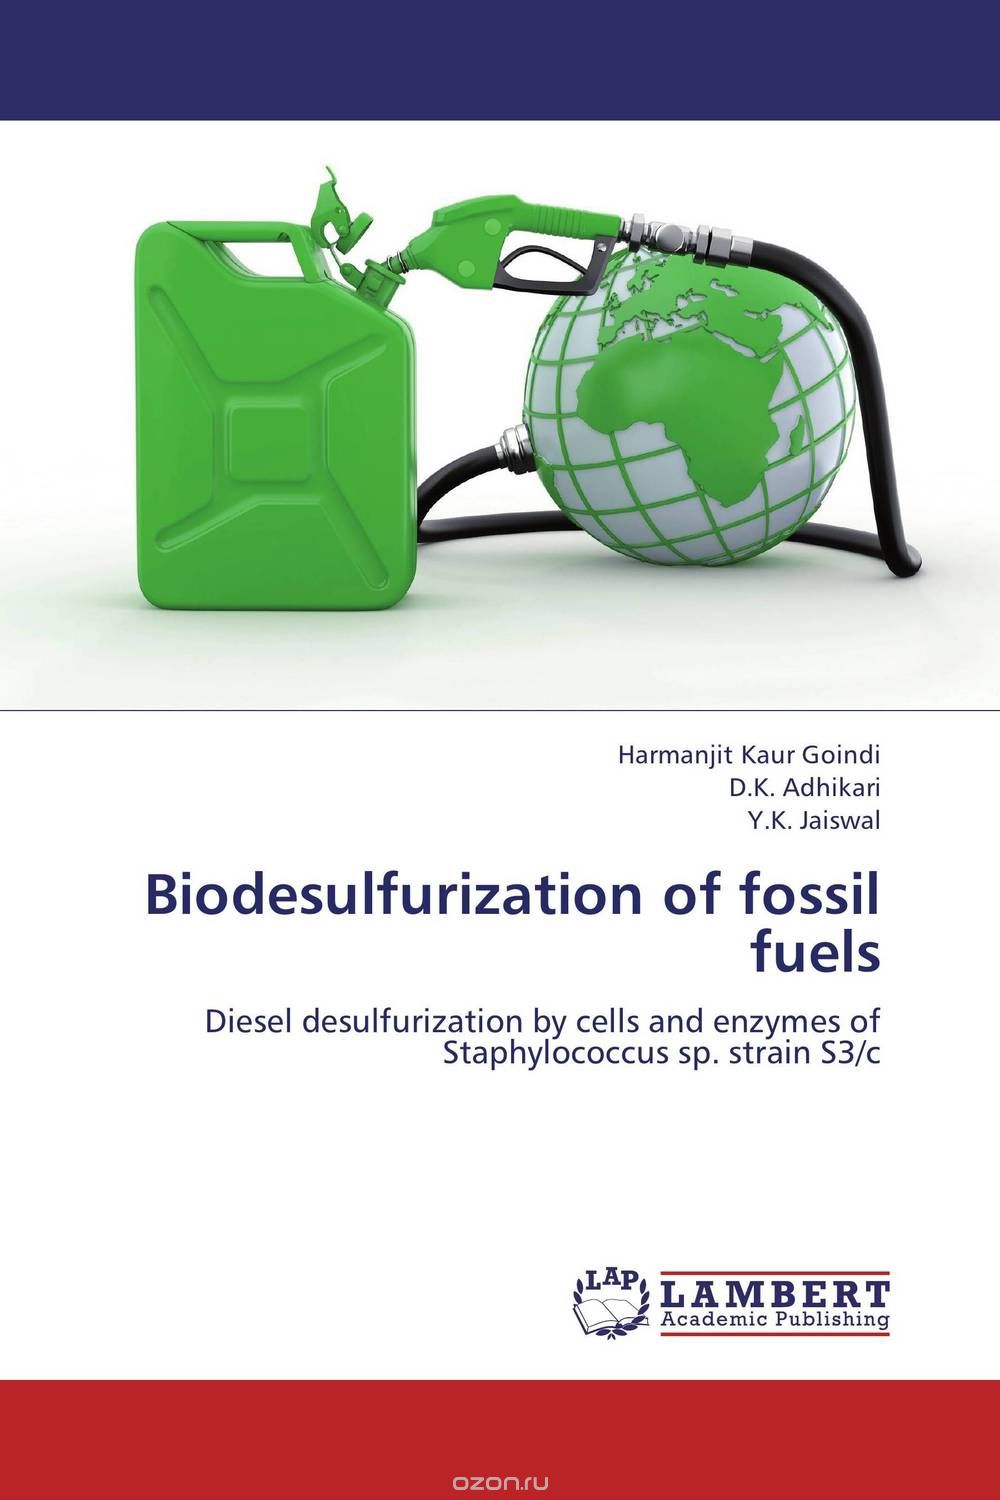 Biodesulfurization of fossil fuels